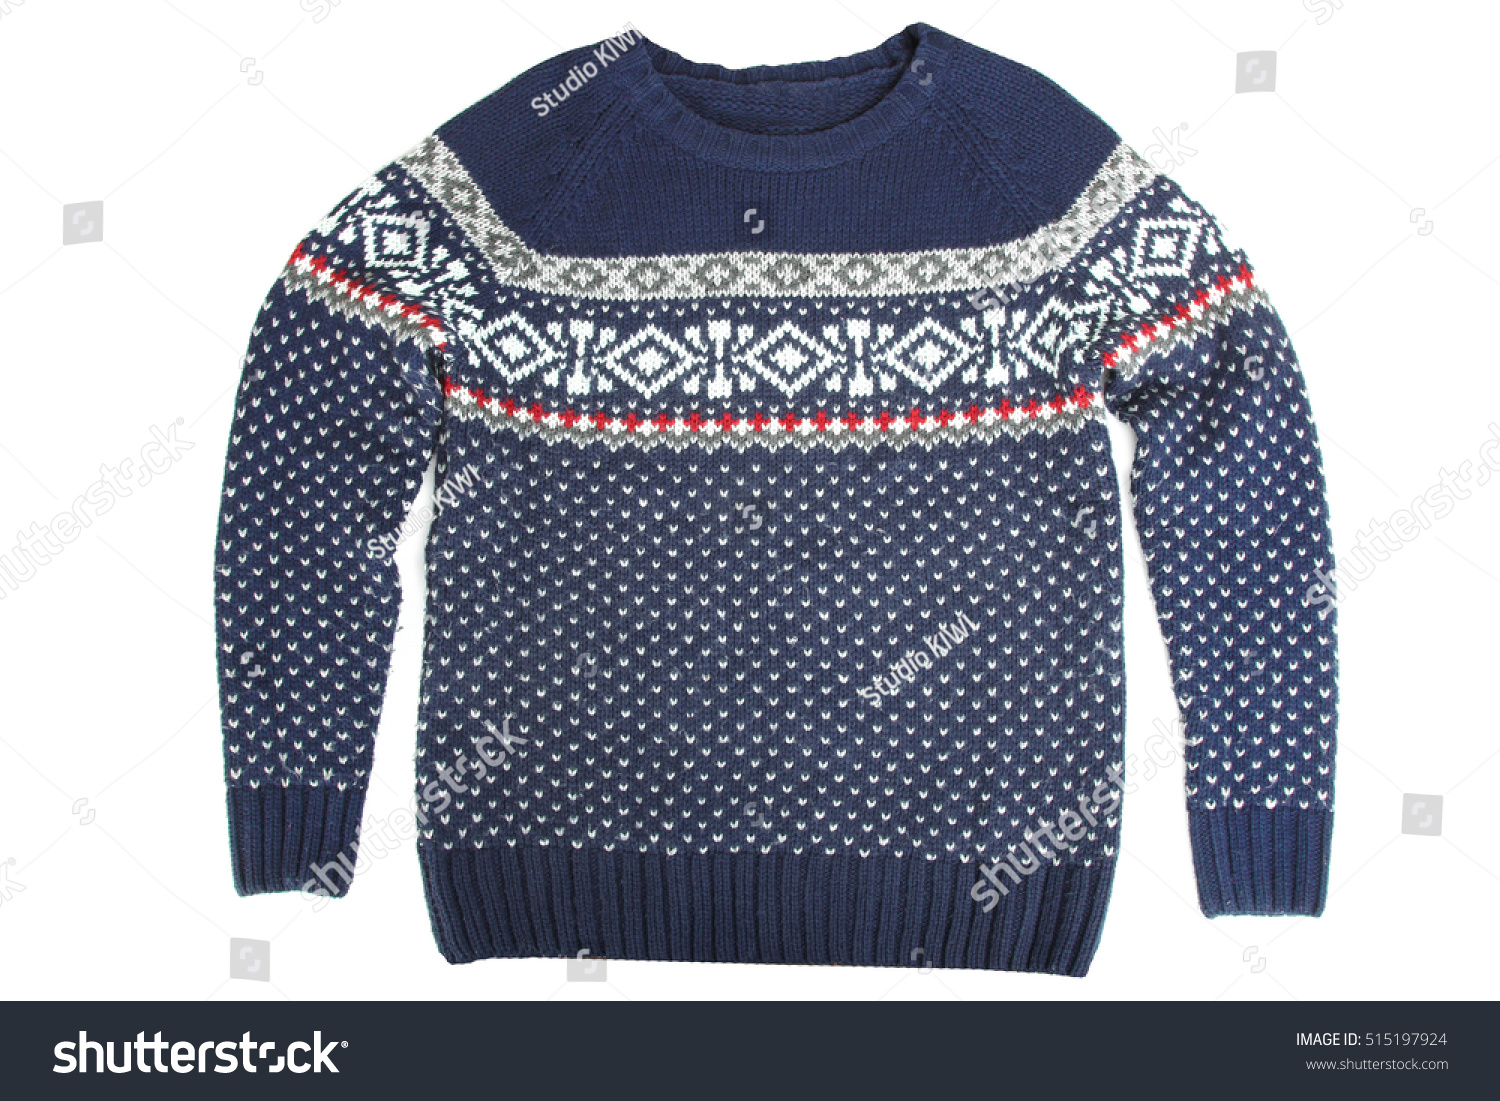 Blue Sweater With A Pattern Stock Photo 515197924 : Shutterstock